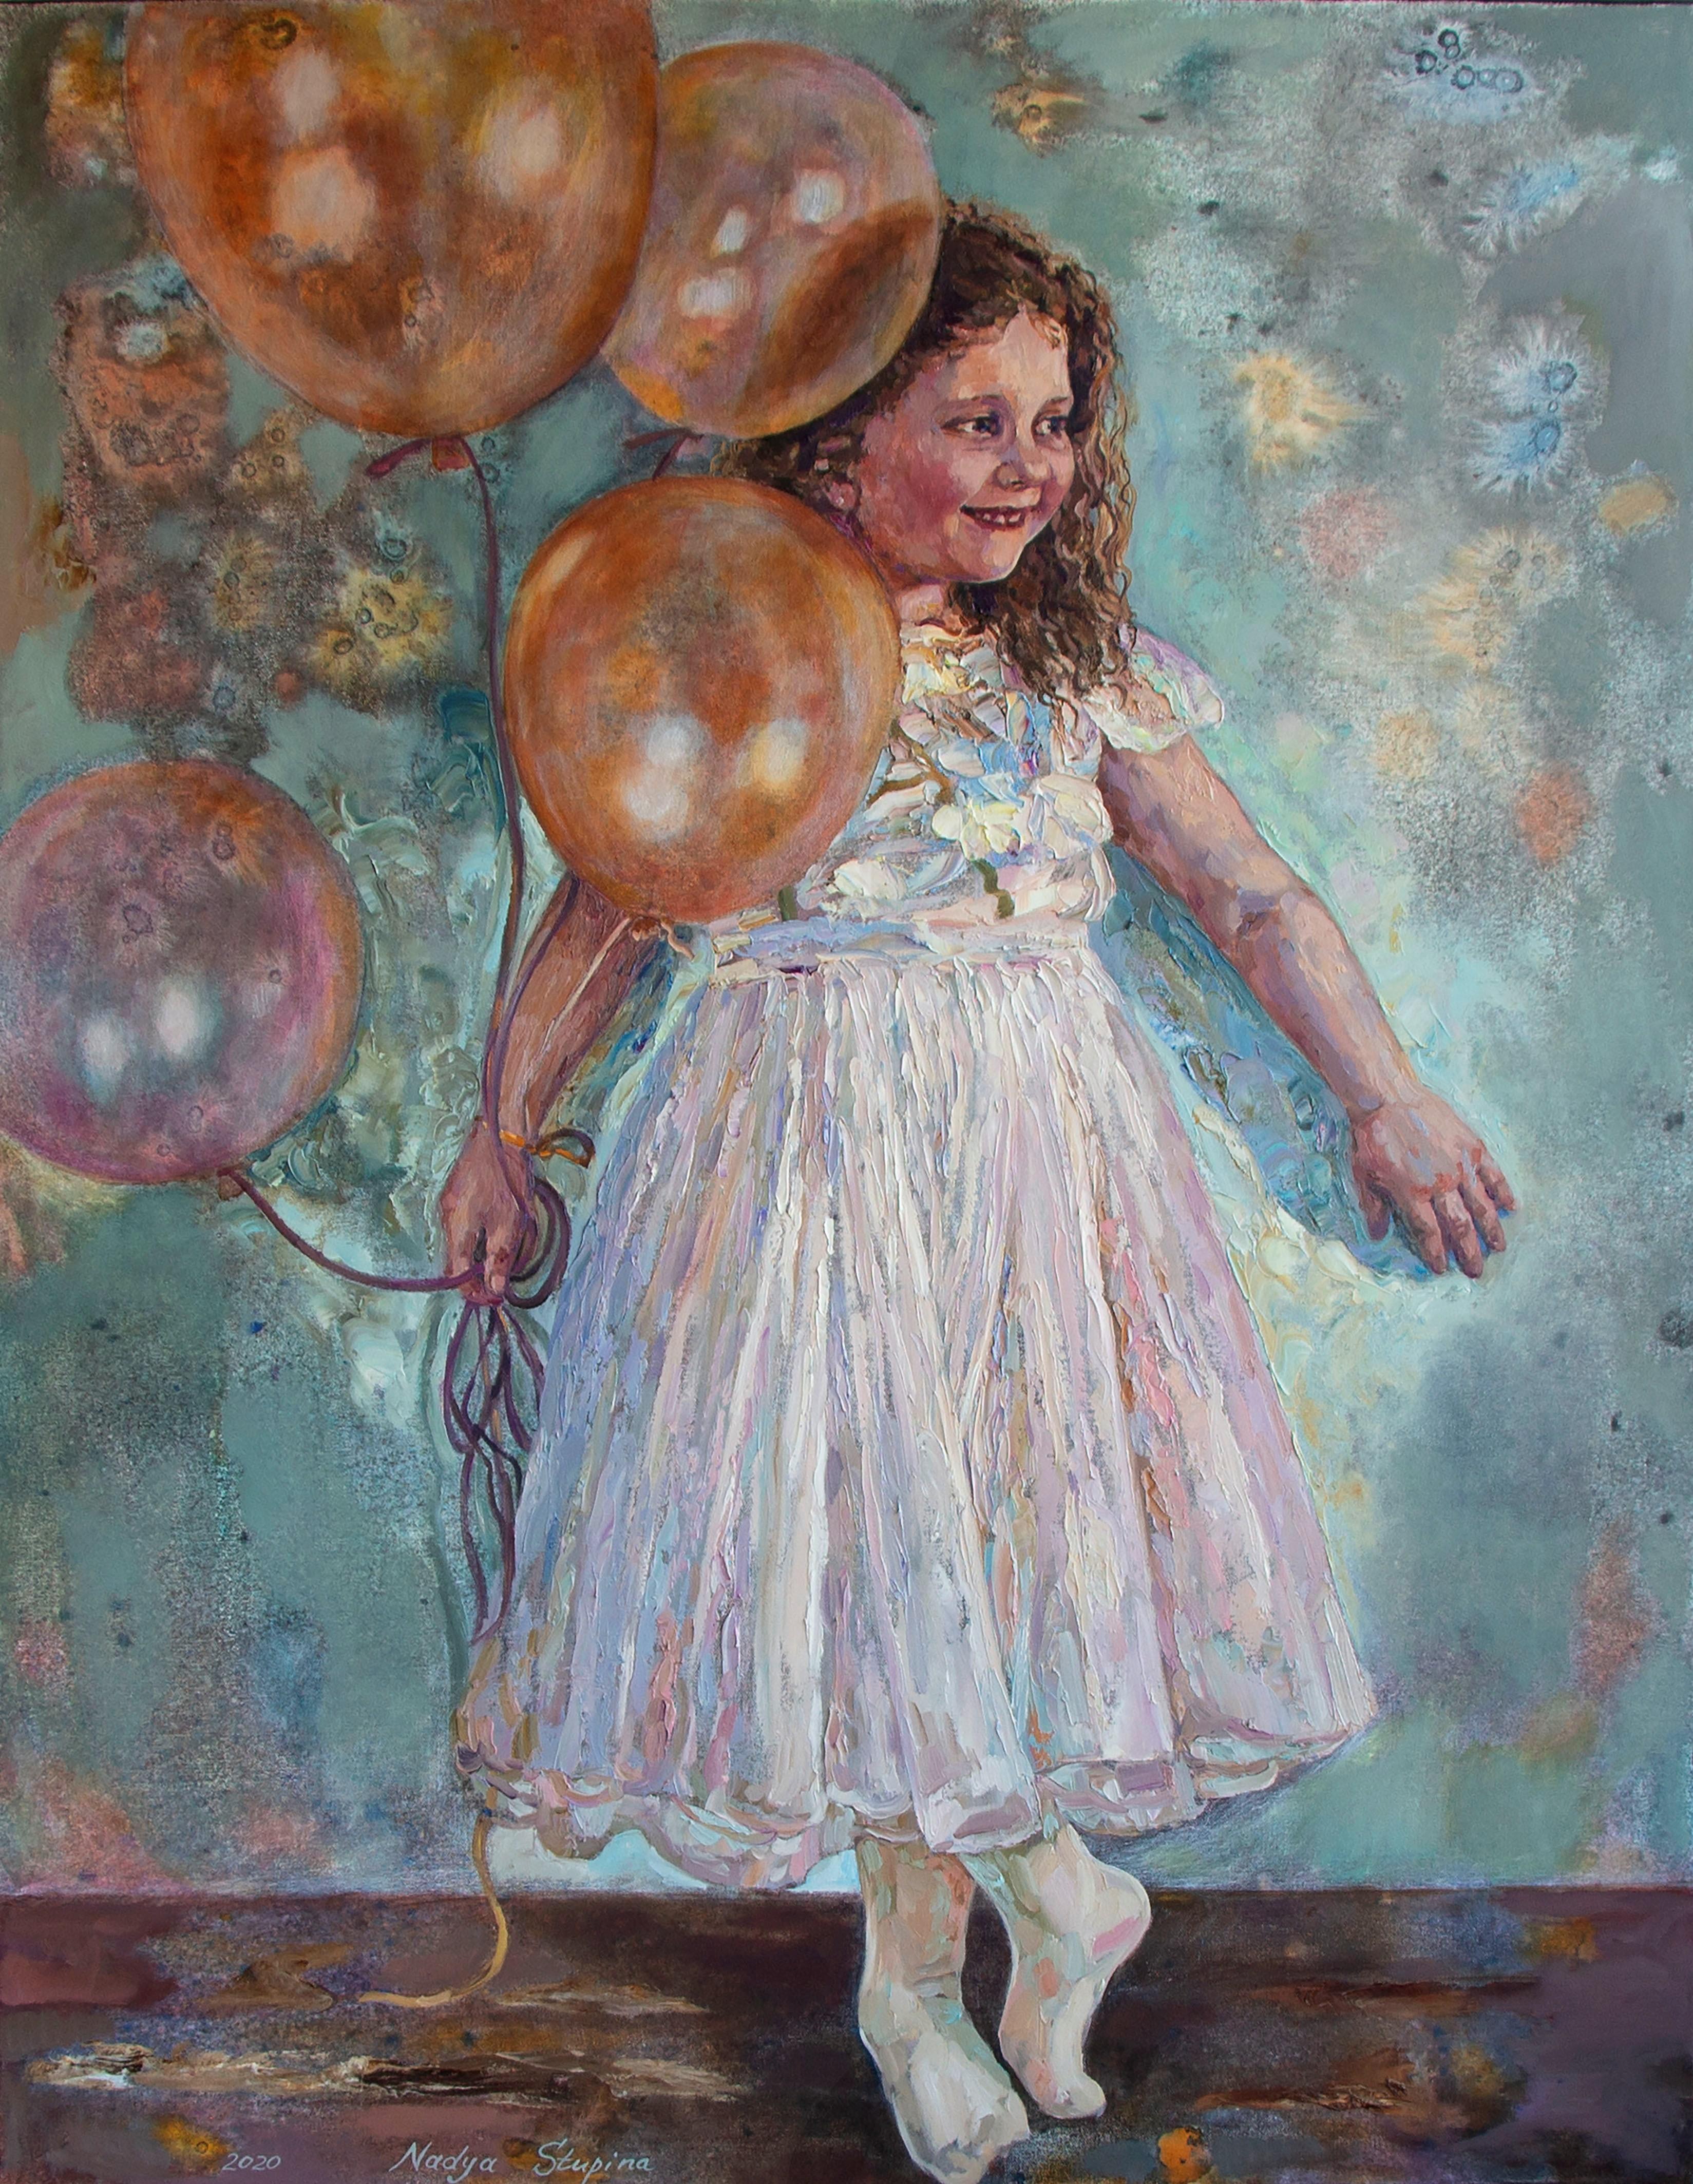 Nadezda Stupina Portrait Painting - Girl with balloons